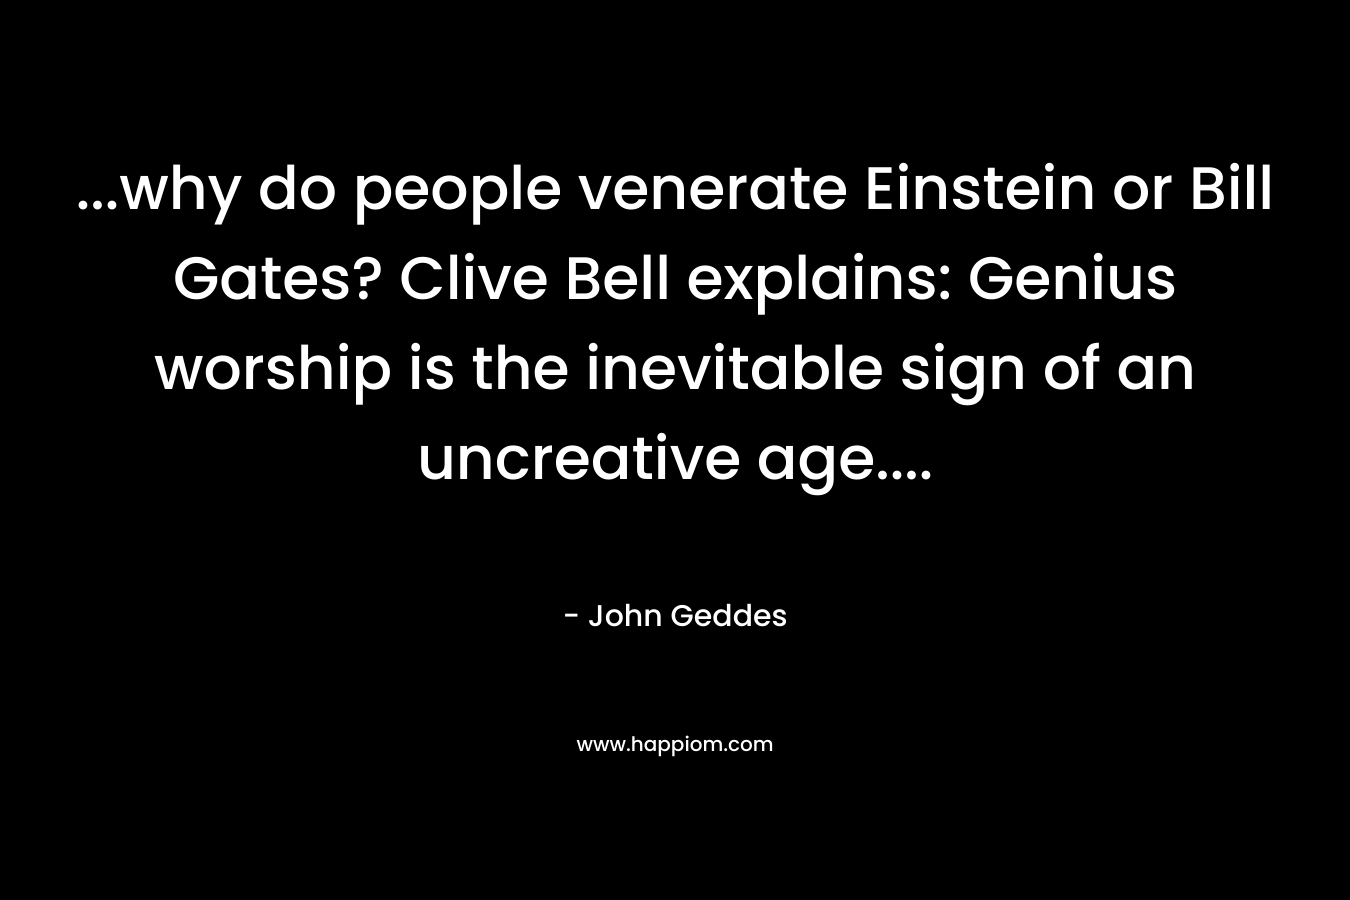 …why do people venerate Einstein or Bill Gates? Clive Bell explains: Genius worship is the inevitable sign of an uncreative age…. – John Geddes